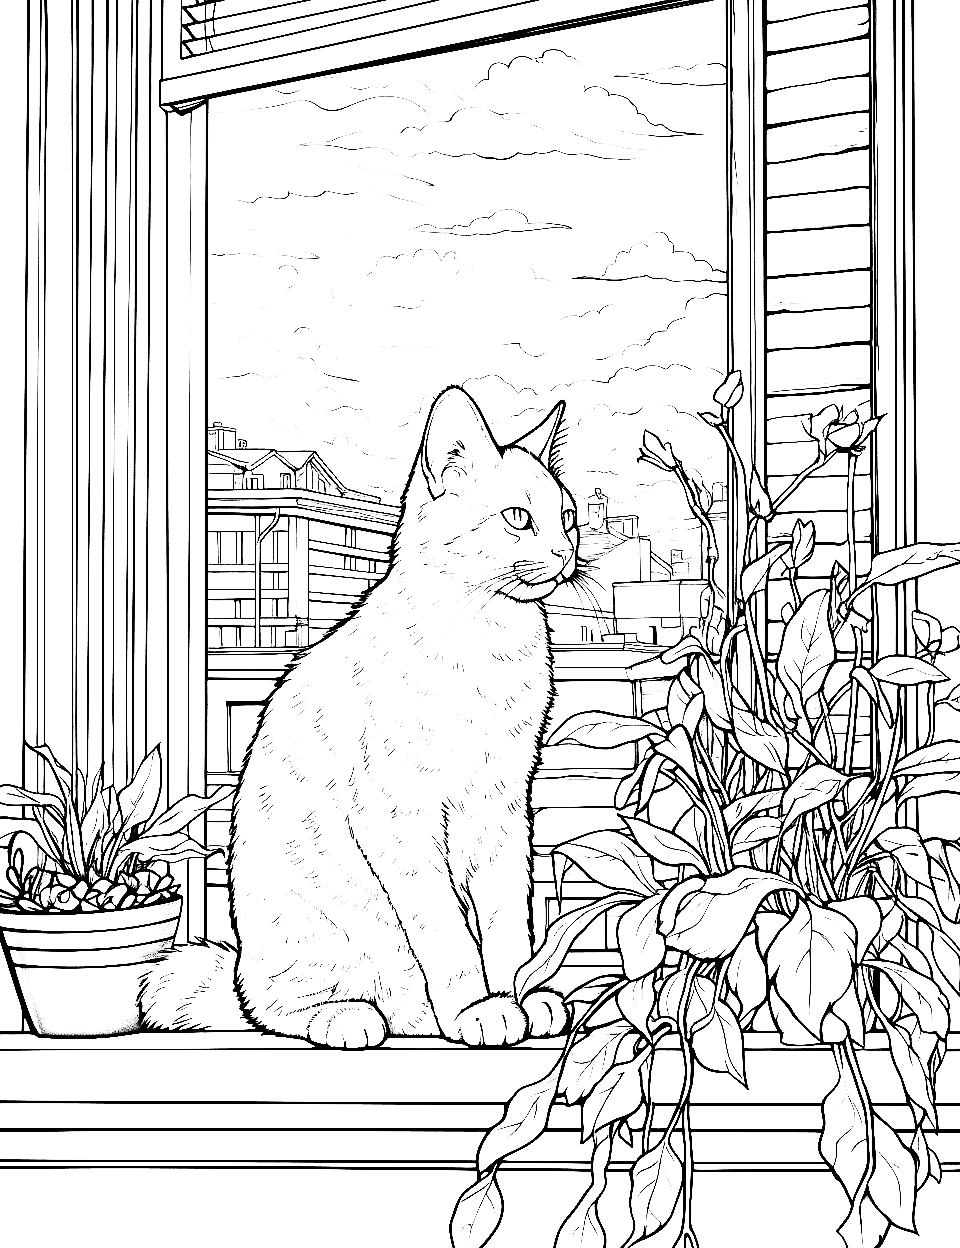 Cat's Window Perch Adult Coloring Page - A cat relaxing on a windowsill, observing the world outside.